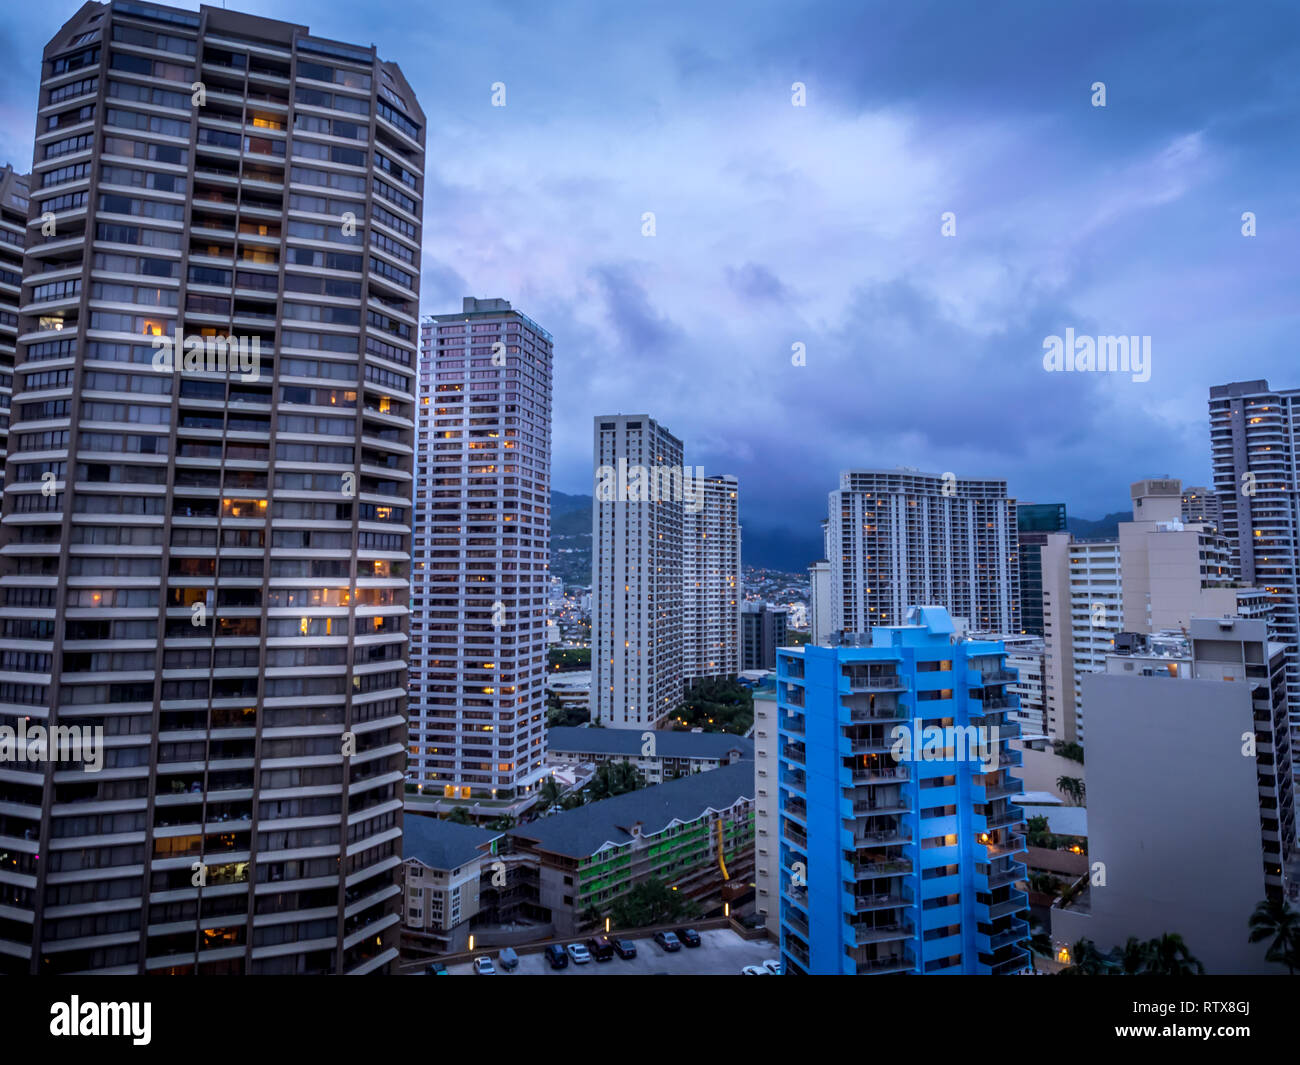 Waikiki skyline in the evening with clouds rolling in over the mountains. Stock Photo